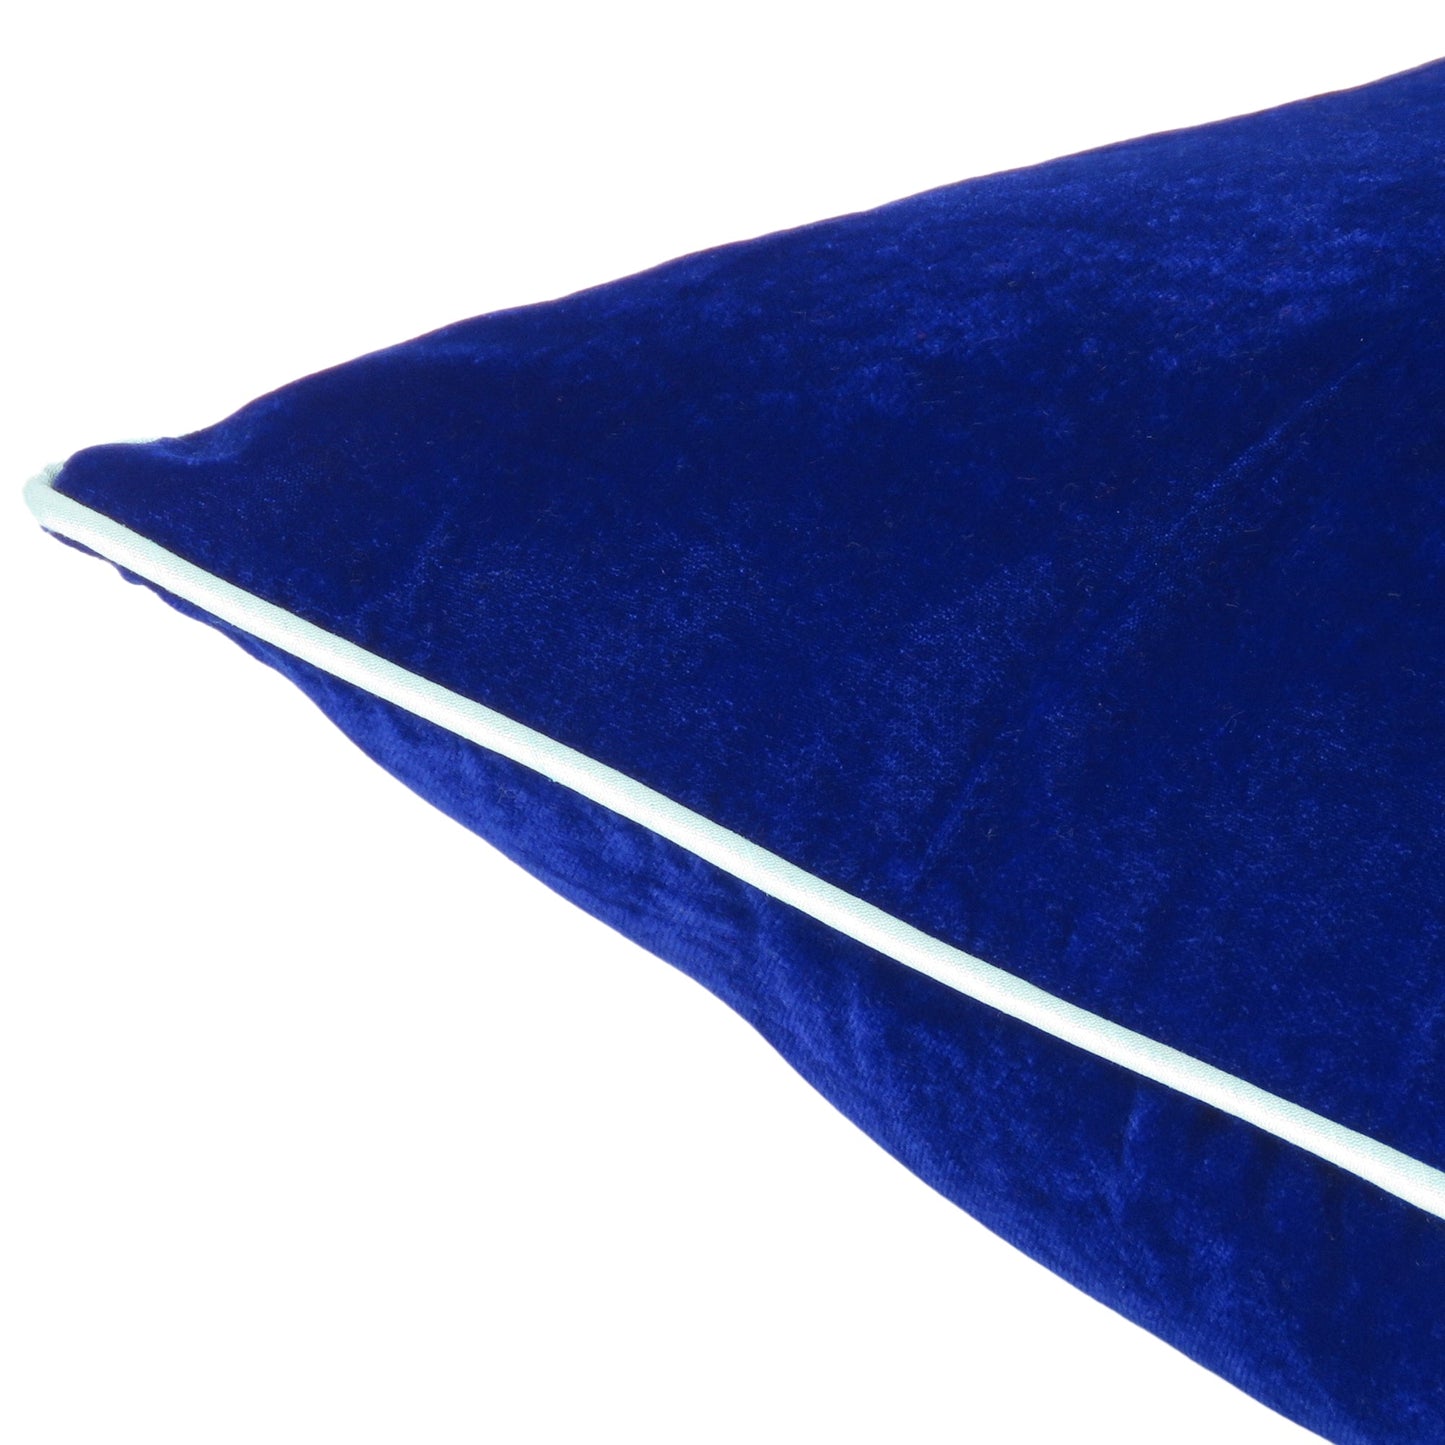 Royal Blue Velvet Cushion Cover with Sea Green Piping Edge in Set of 2